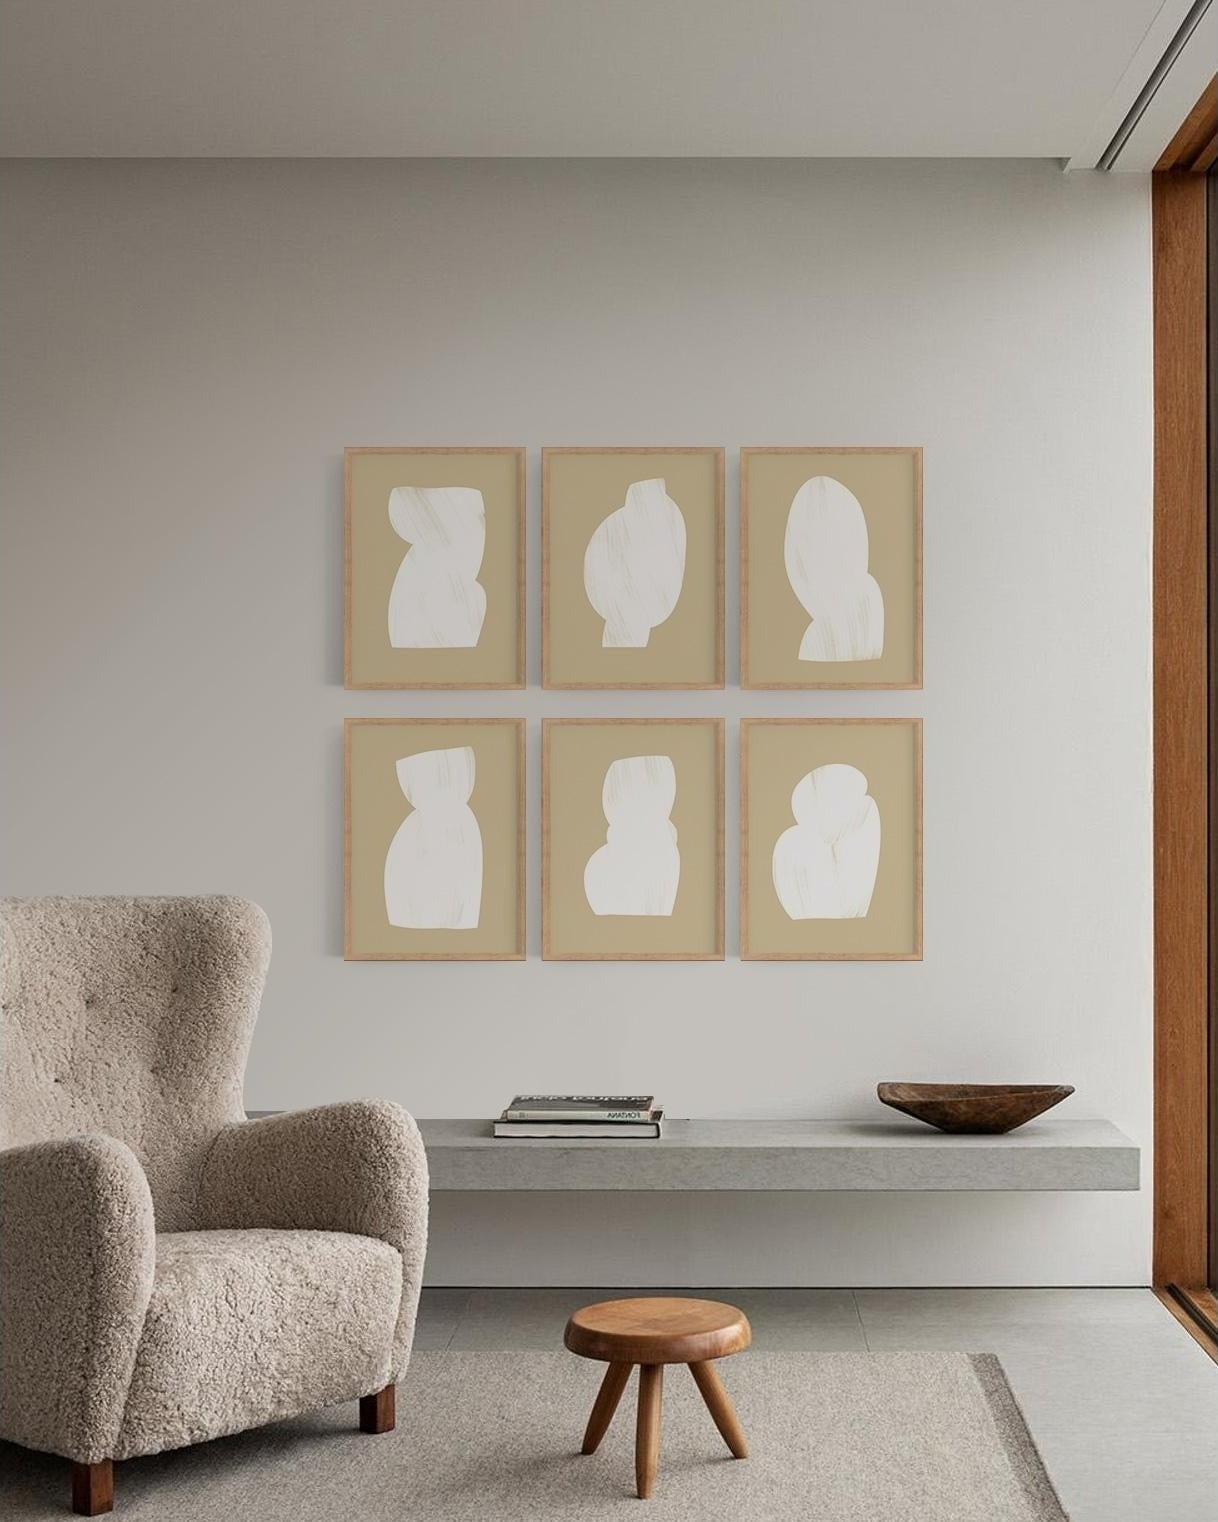 Six framed silhouettes on a wall above a sofa, with a side table and a wooden stool in a minimalist room